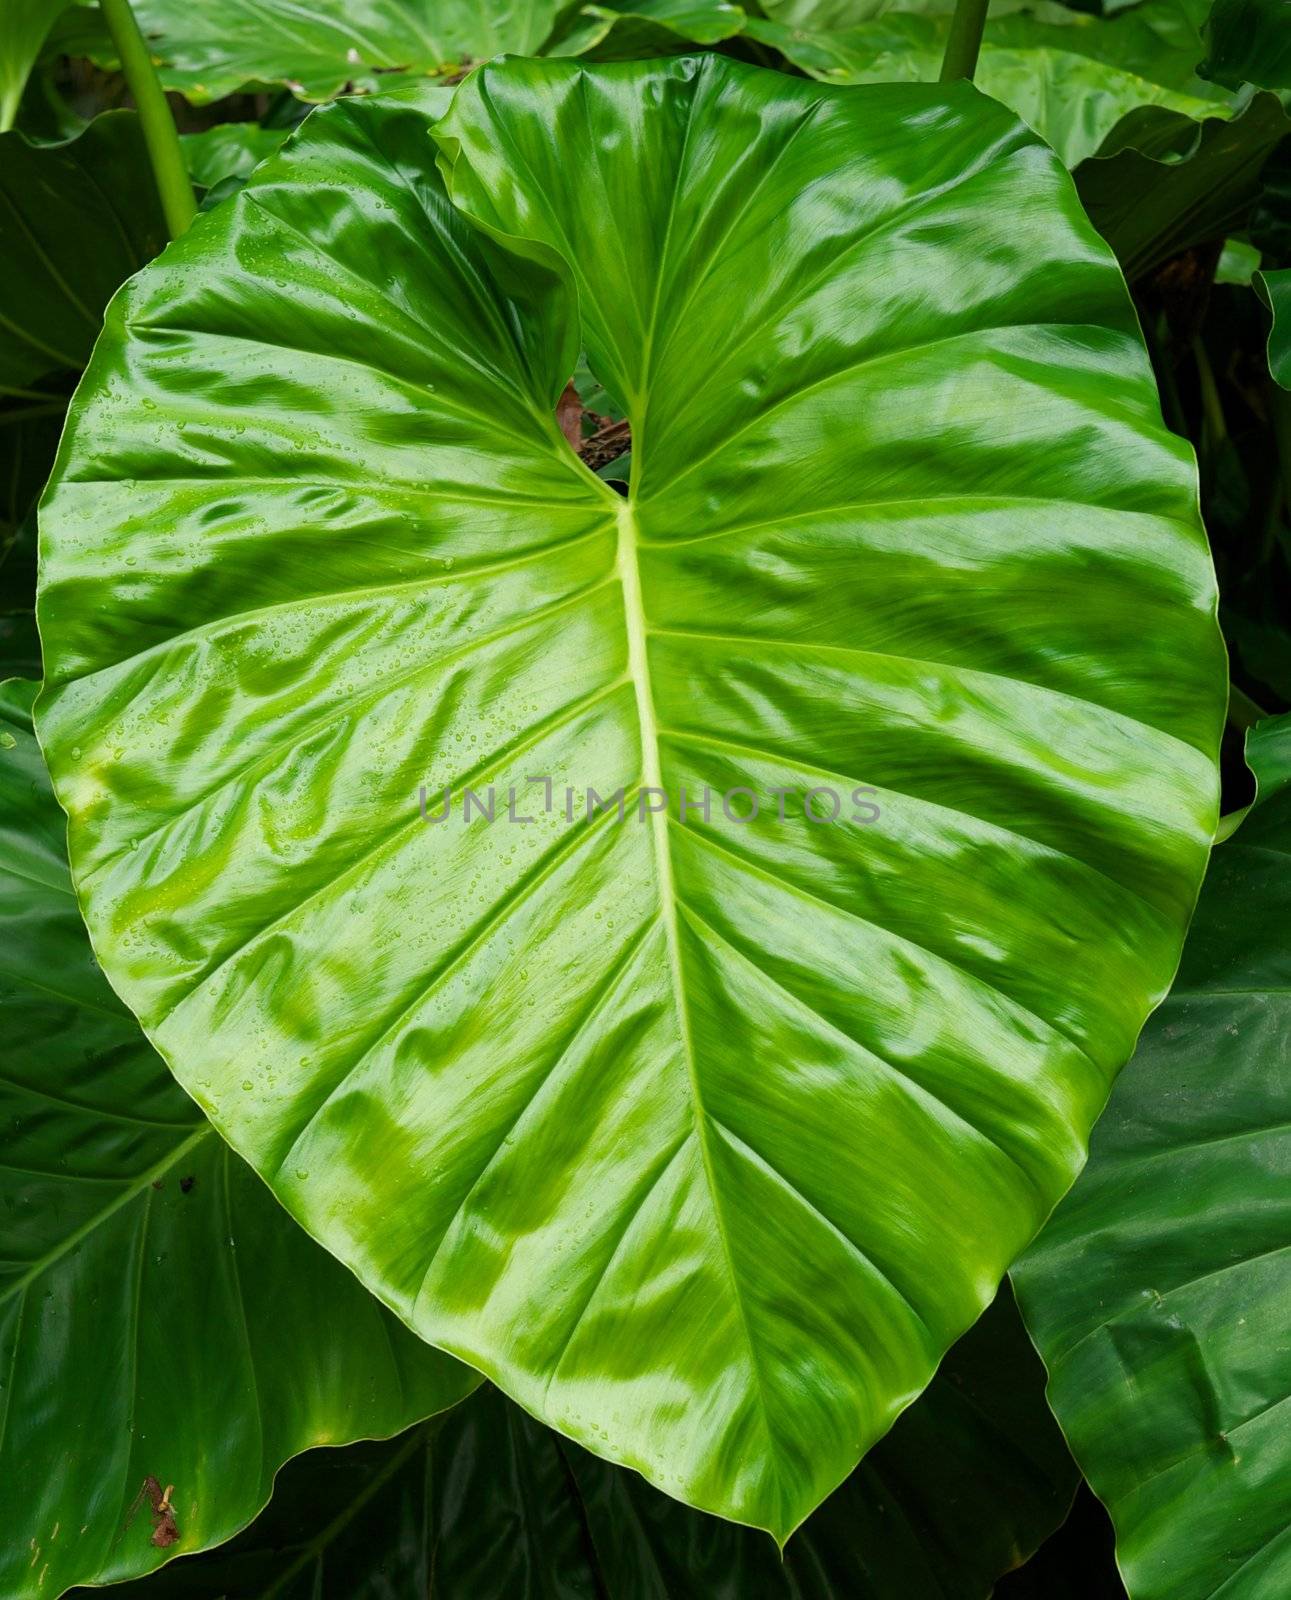 A huge green leaf from an Elephant Ear plant in Hawaii